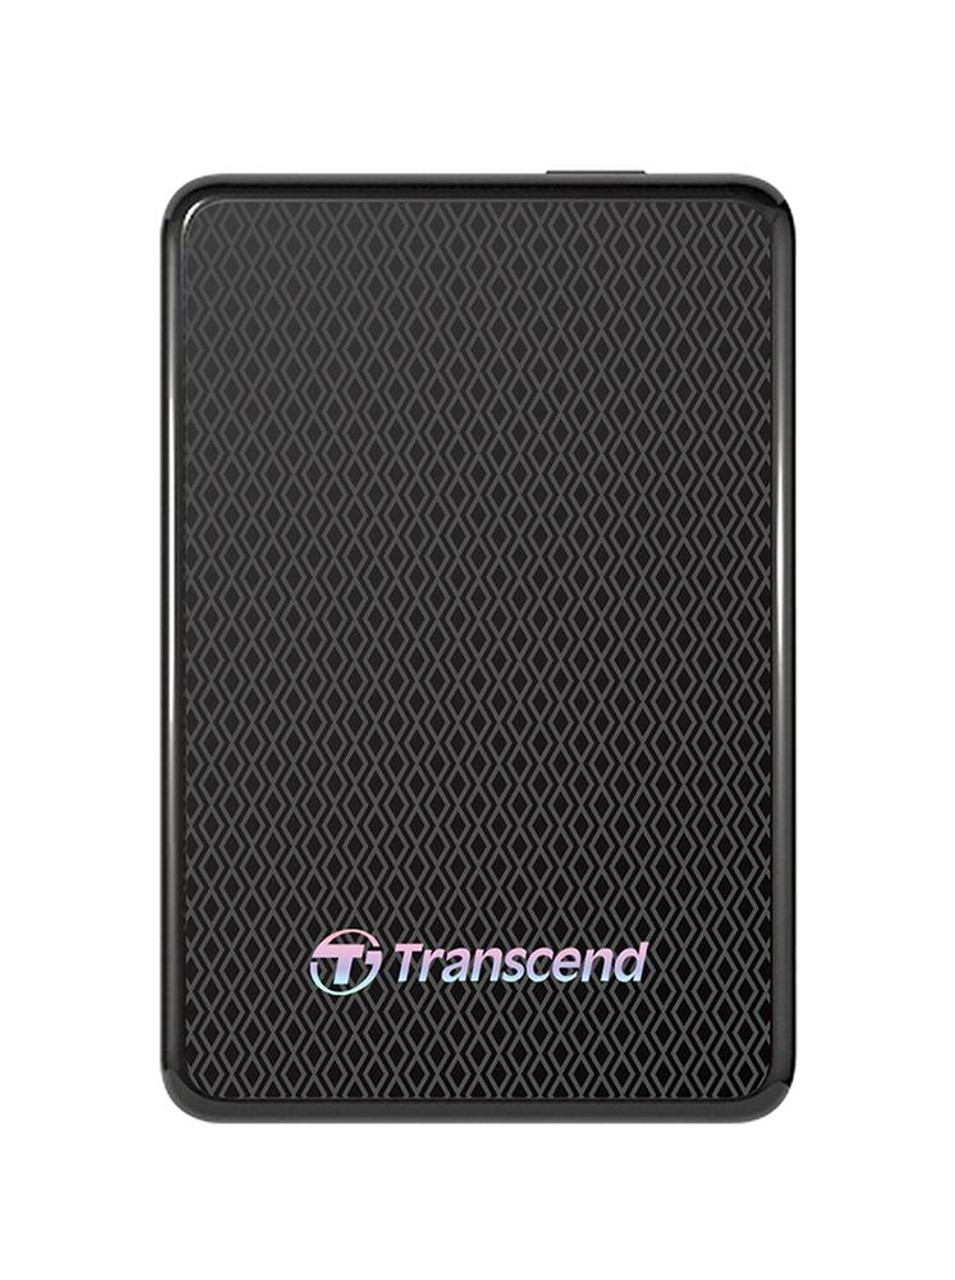 ESD200 Transcend 128GB 3.0 External Solid State Drive